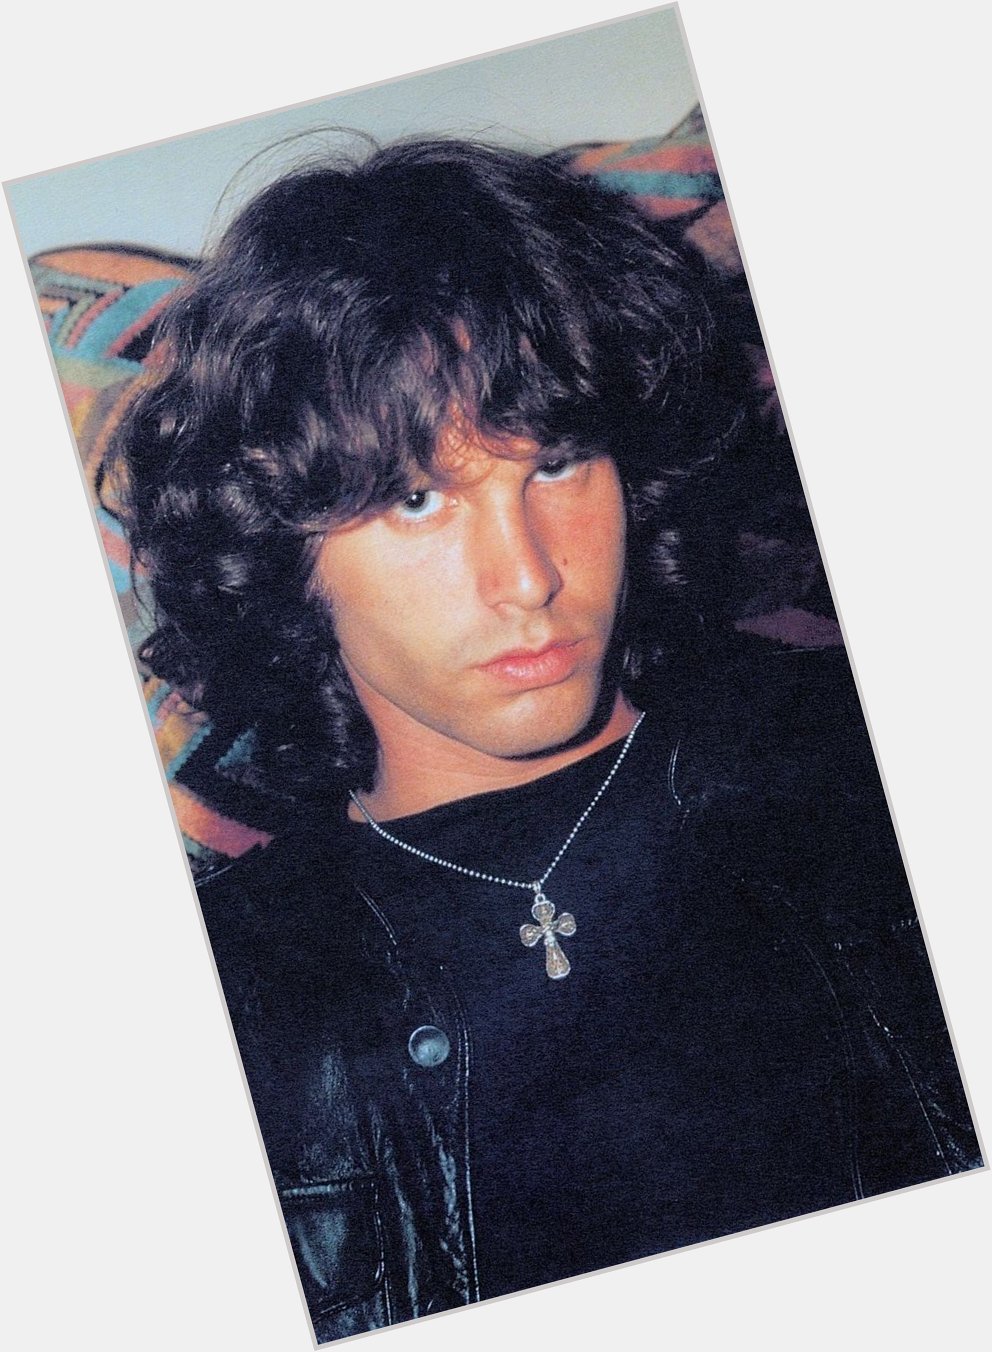 Happy birthday to one of my favorite artists of all time, Jim Morrison!!   